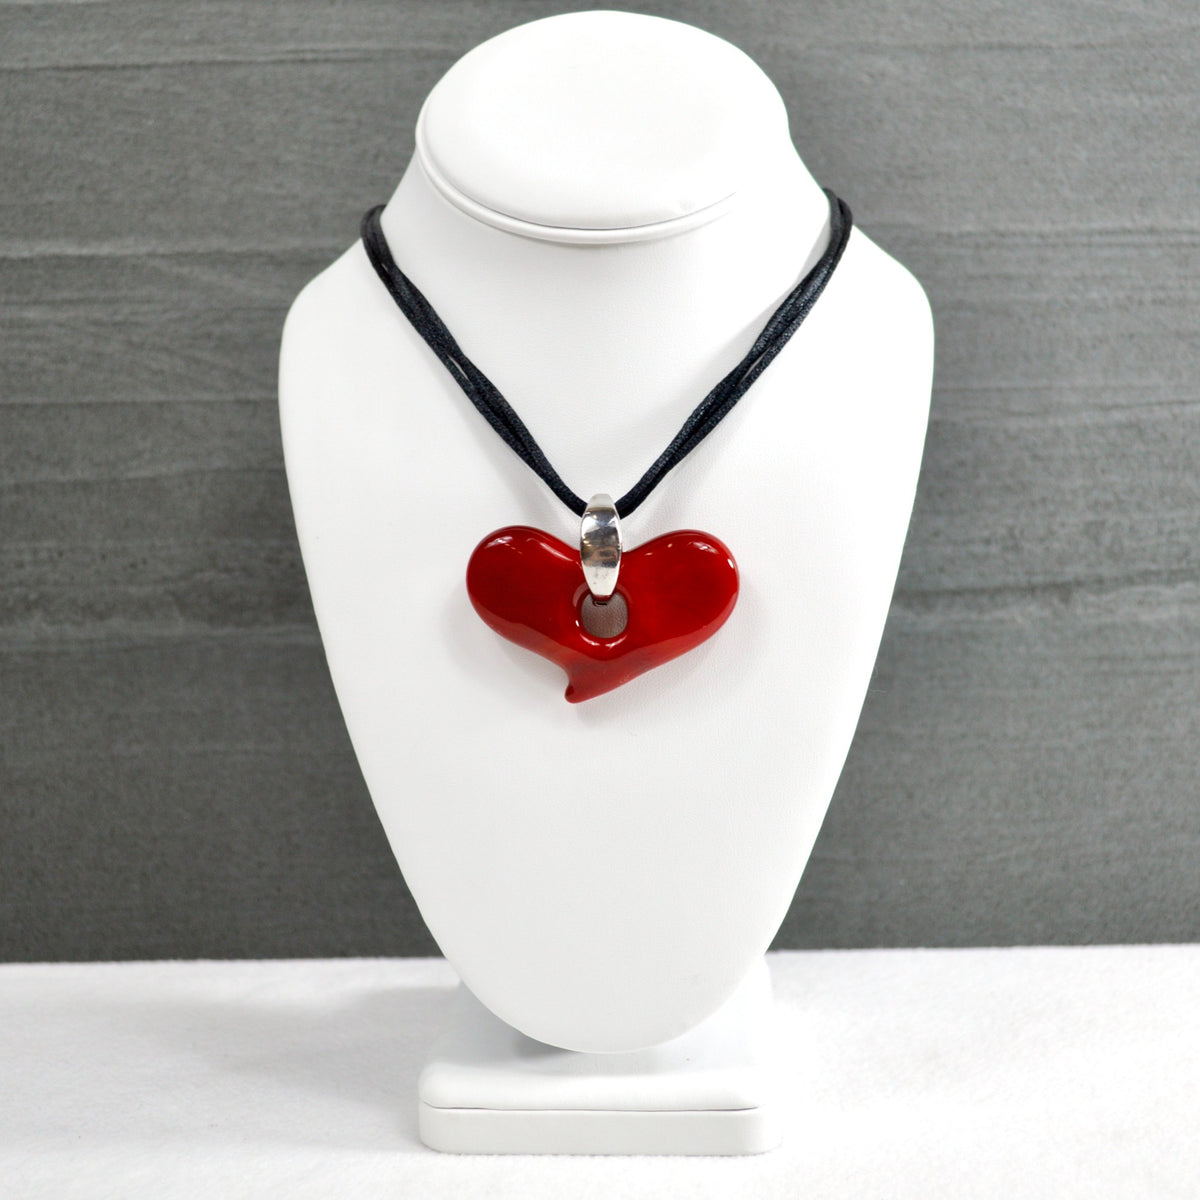 Murano Glass Solid Heart Pendant Necklace, Medium or Large, Made in Italy - My Italian Decor